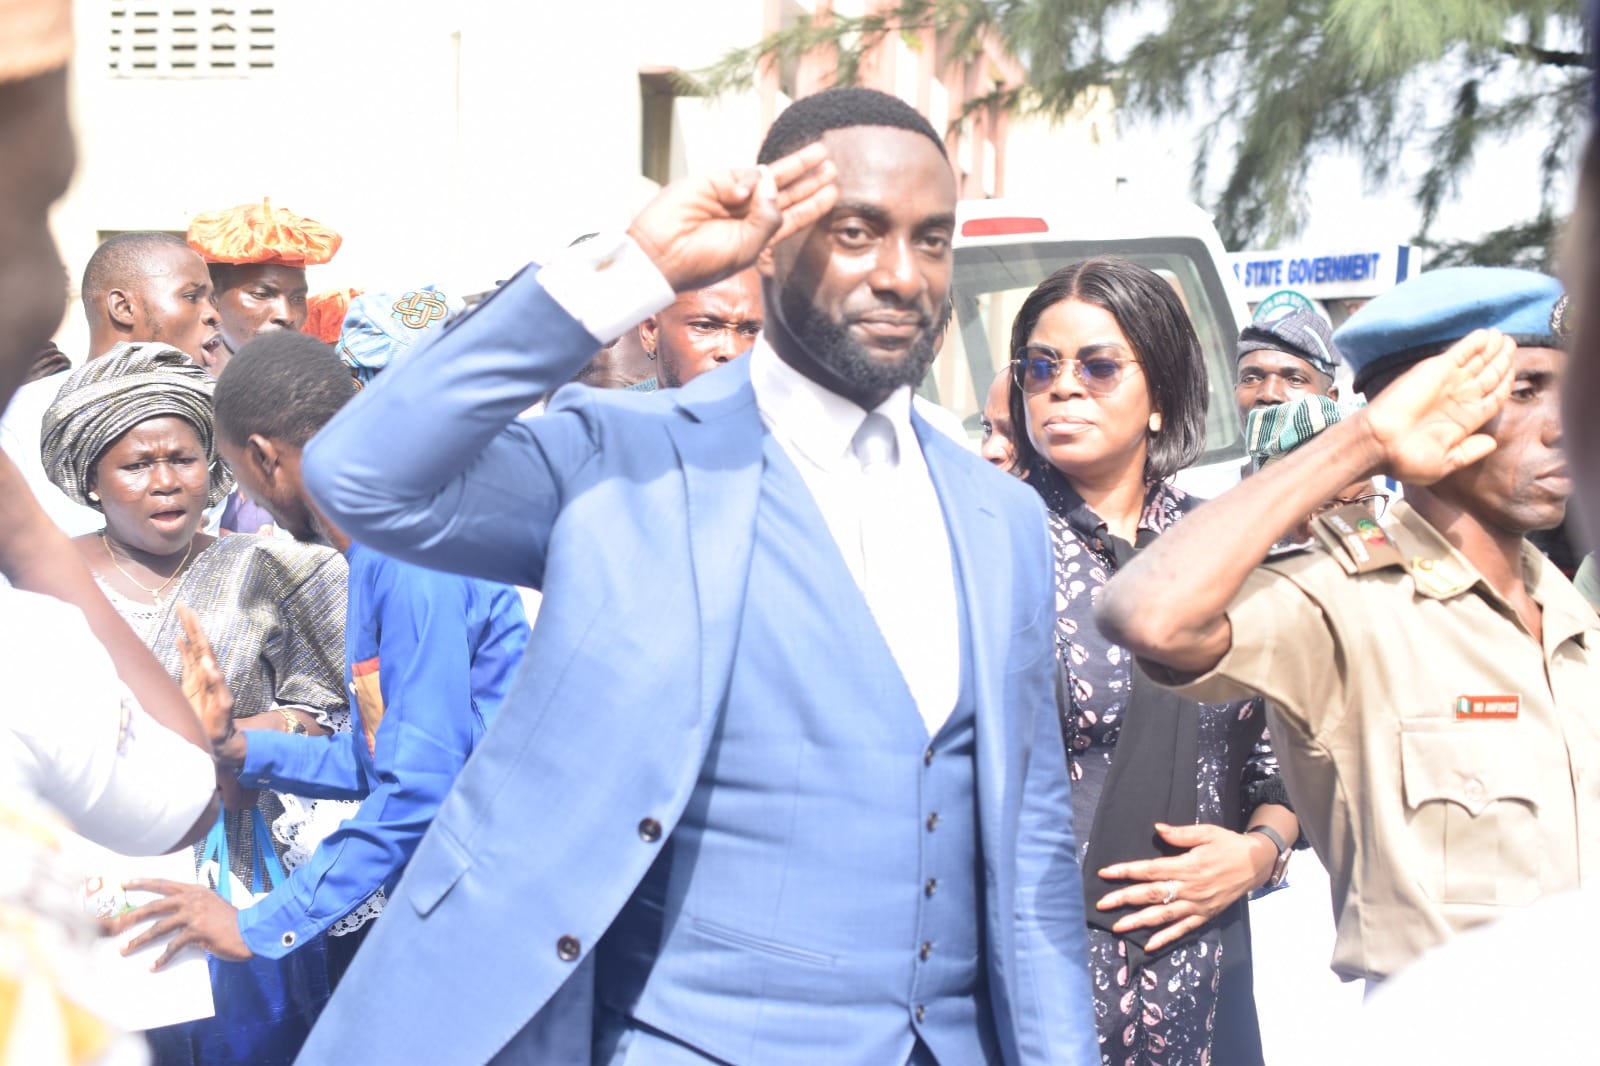 The New Commissioner when he arrived at the Ministry's Premise on Friday. Credit: Lagos State Government Facebook Page.